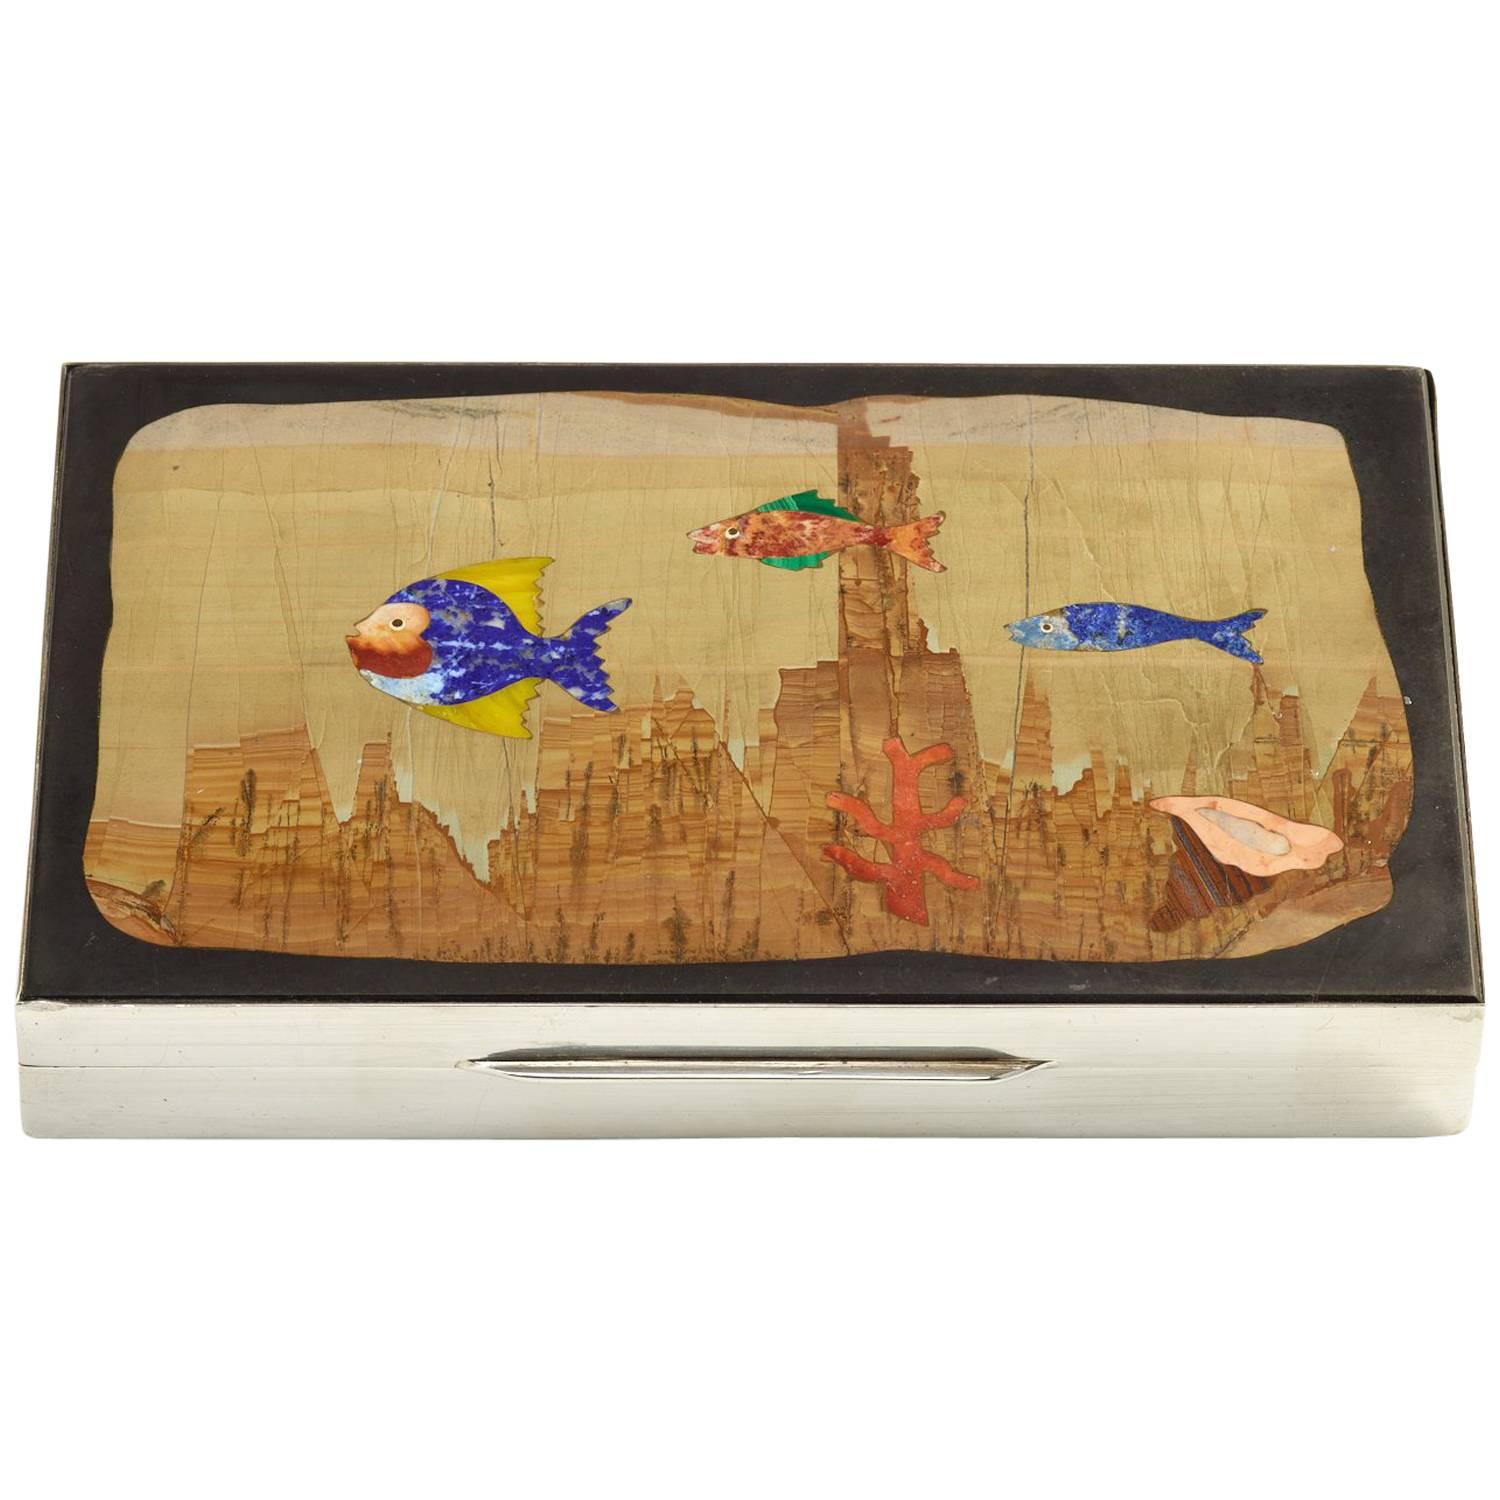 Mid-20th C Sterling Silver Box with Aquatic Mosaic Scene on the Lid, circa 1960